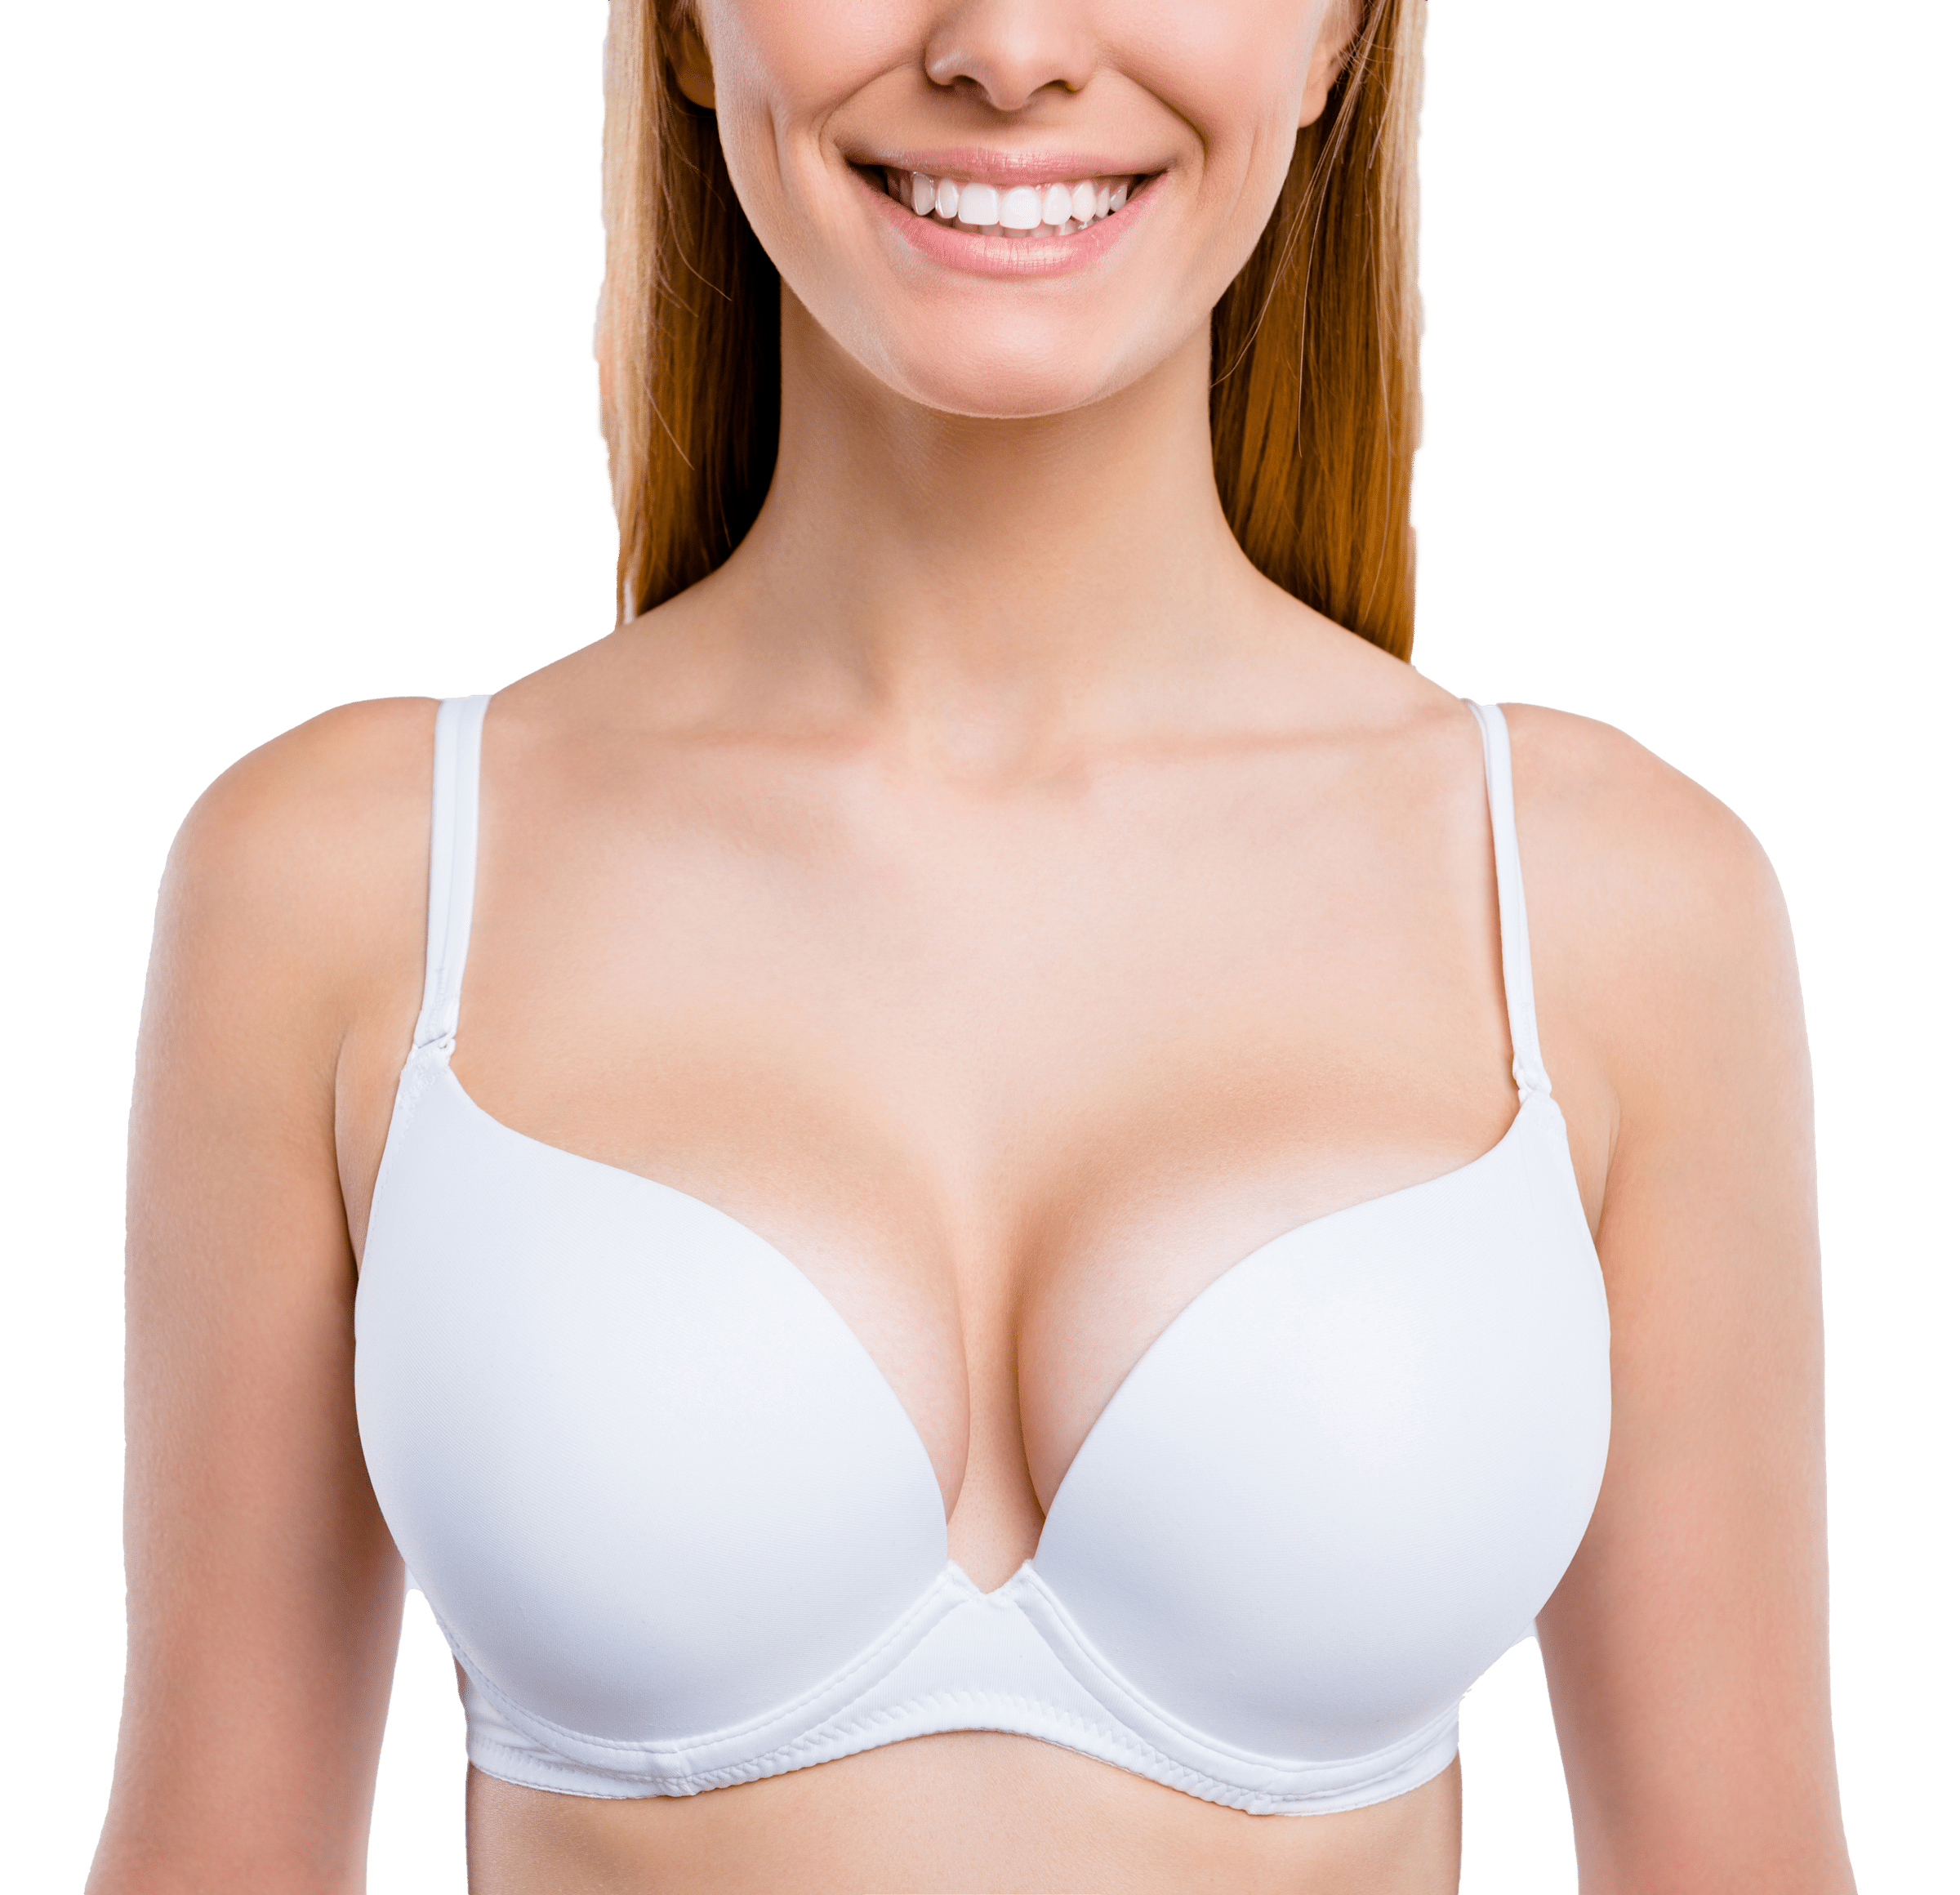 Wholesale best breast enlargement For Plumping And Shaping 